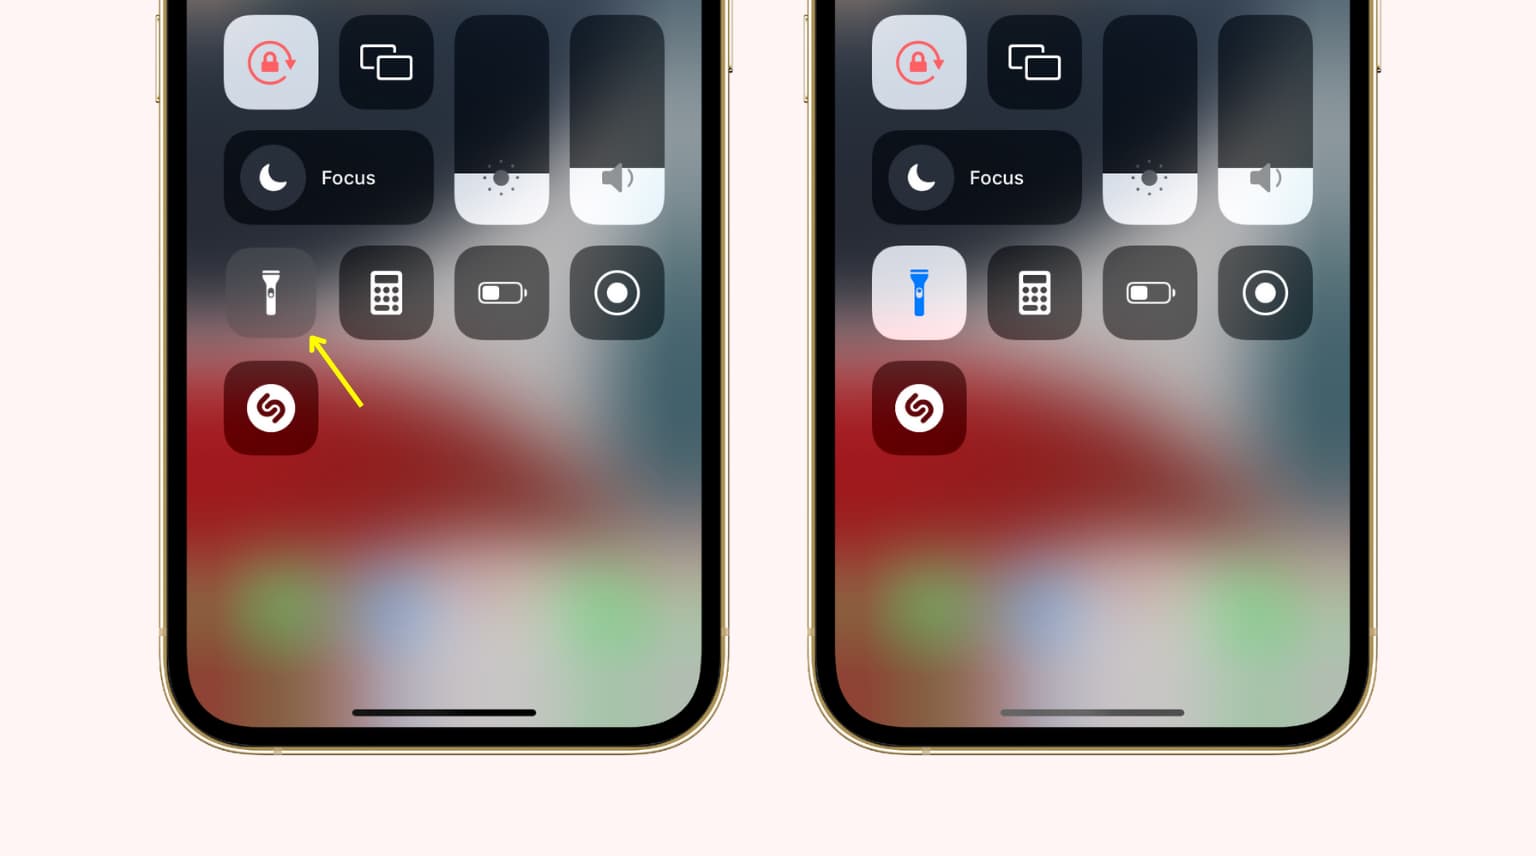 Flash Troubleshooting: Fixing Flash Issues On IPhone 11